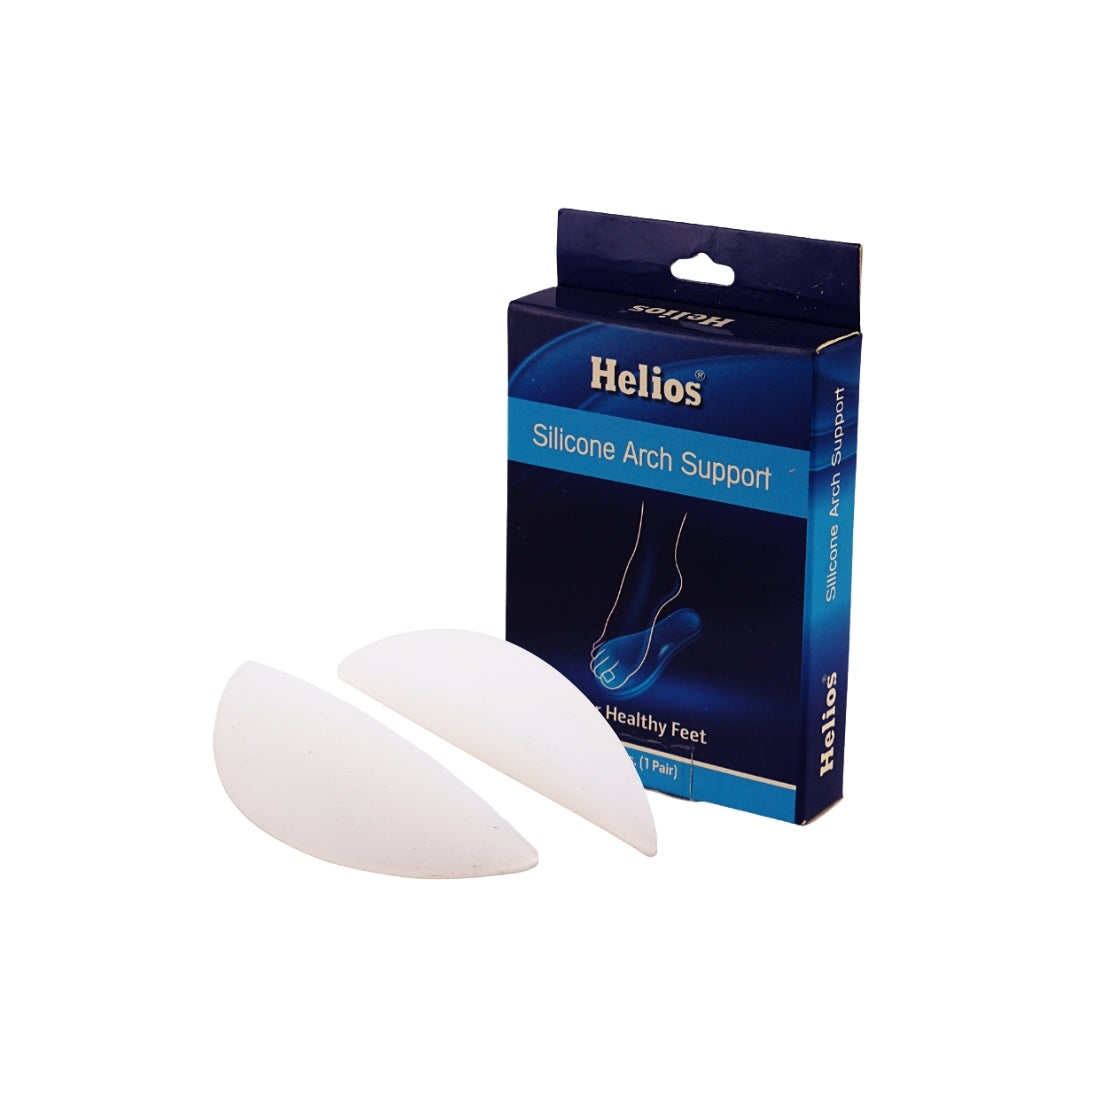 Helios Silicone Arch Support